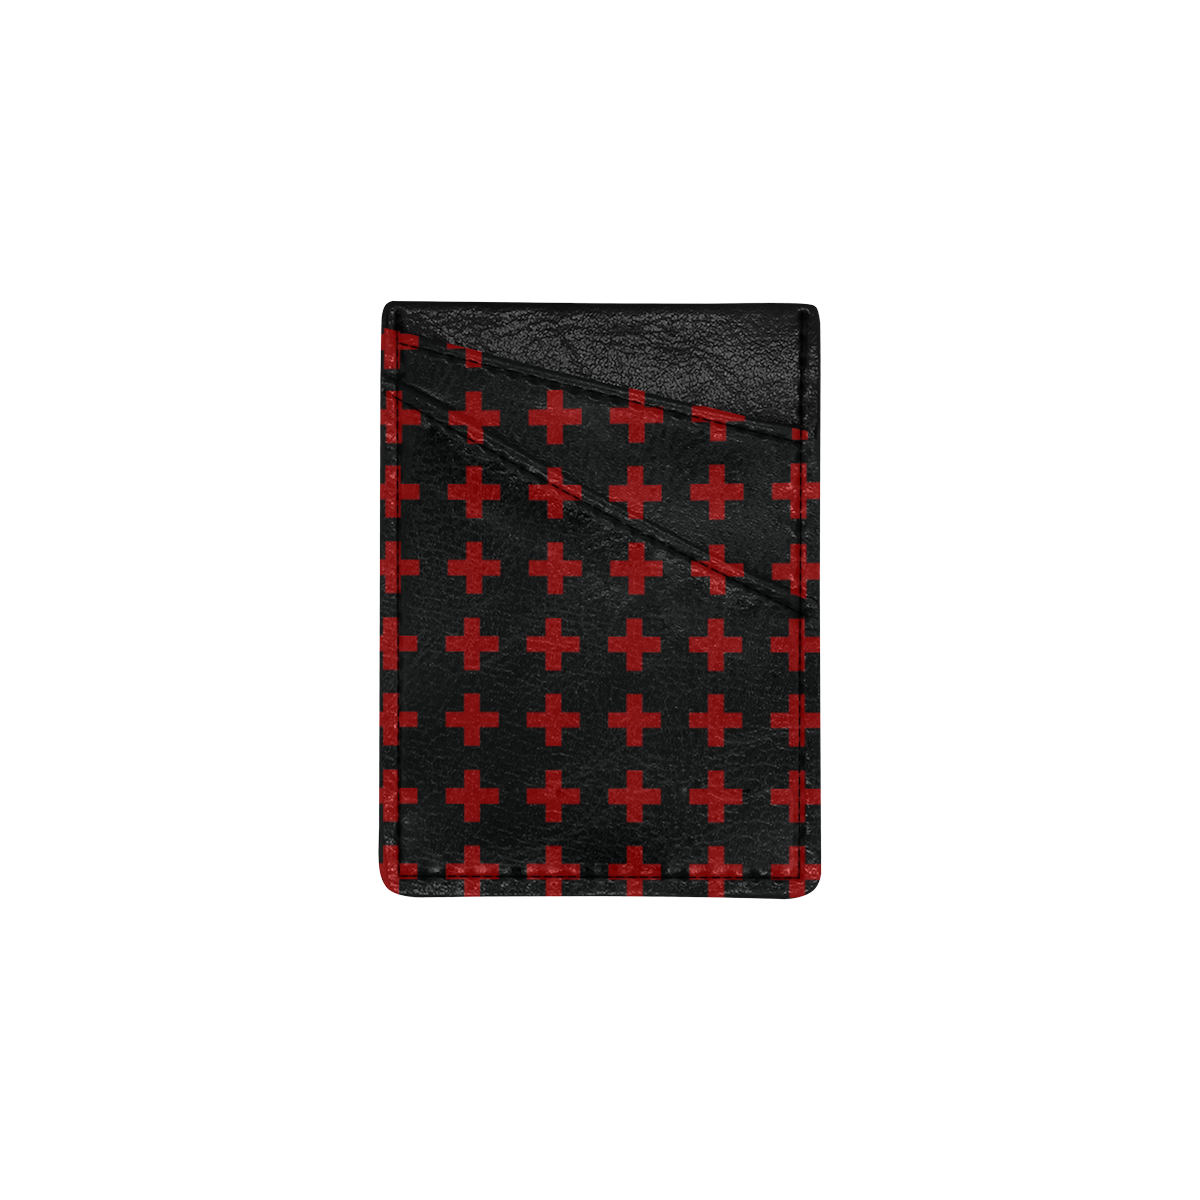 Punk Rock Style Red Crosses Pattern Design Rock Style Cell Phone Card Holder